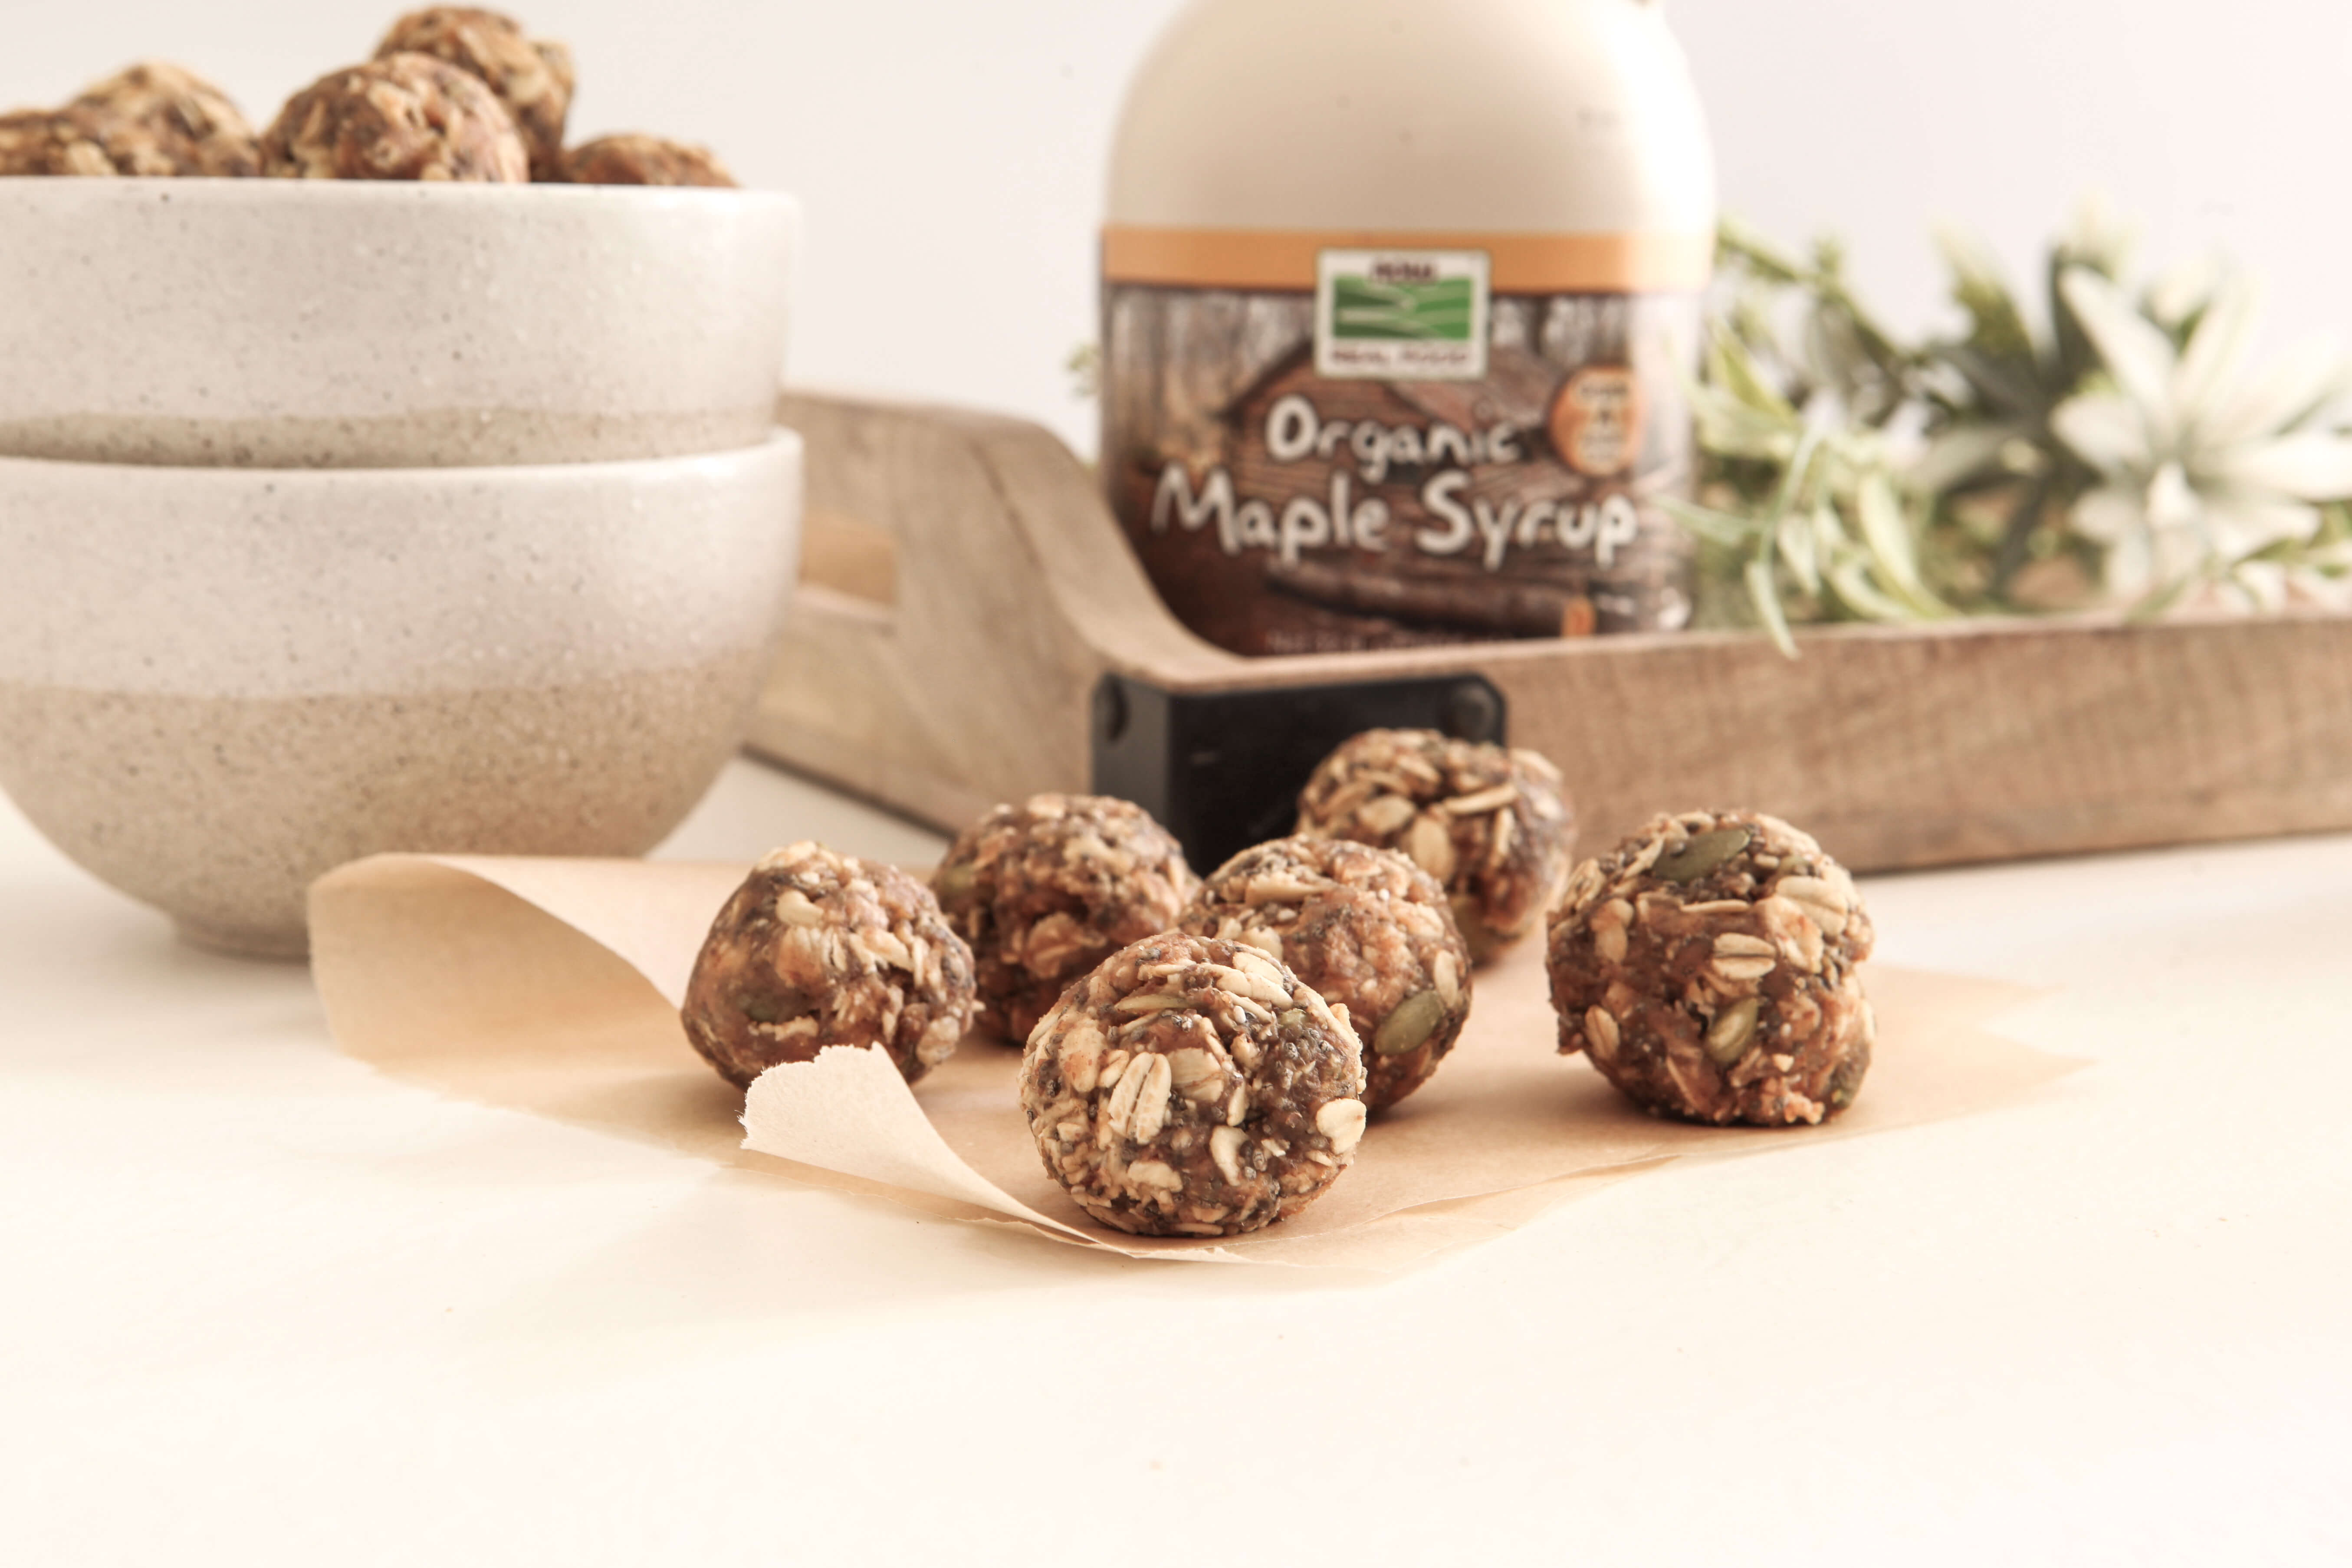 Low FODMAP Seed Cycling Energy Balls agutsygirl.com #seedcycling #lowfodmap #glutenfree #guthealth NOW Foods Organic Maple Syrup